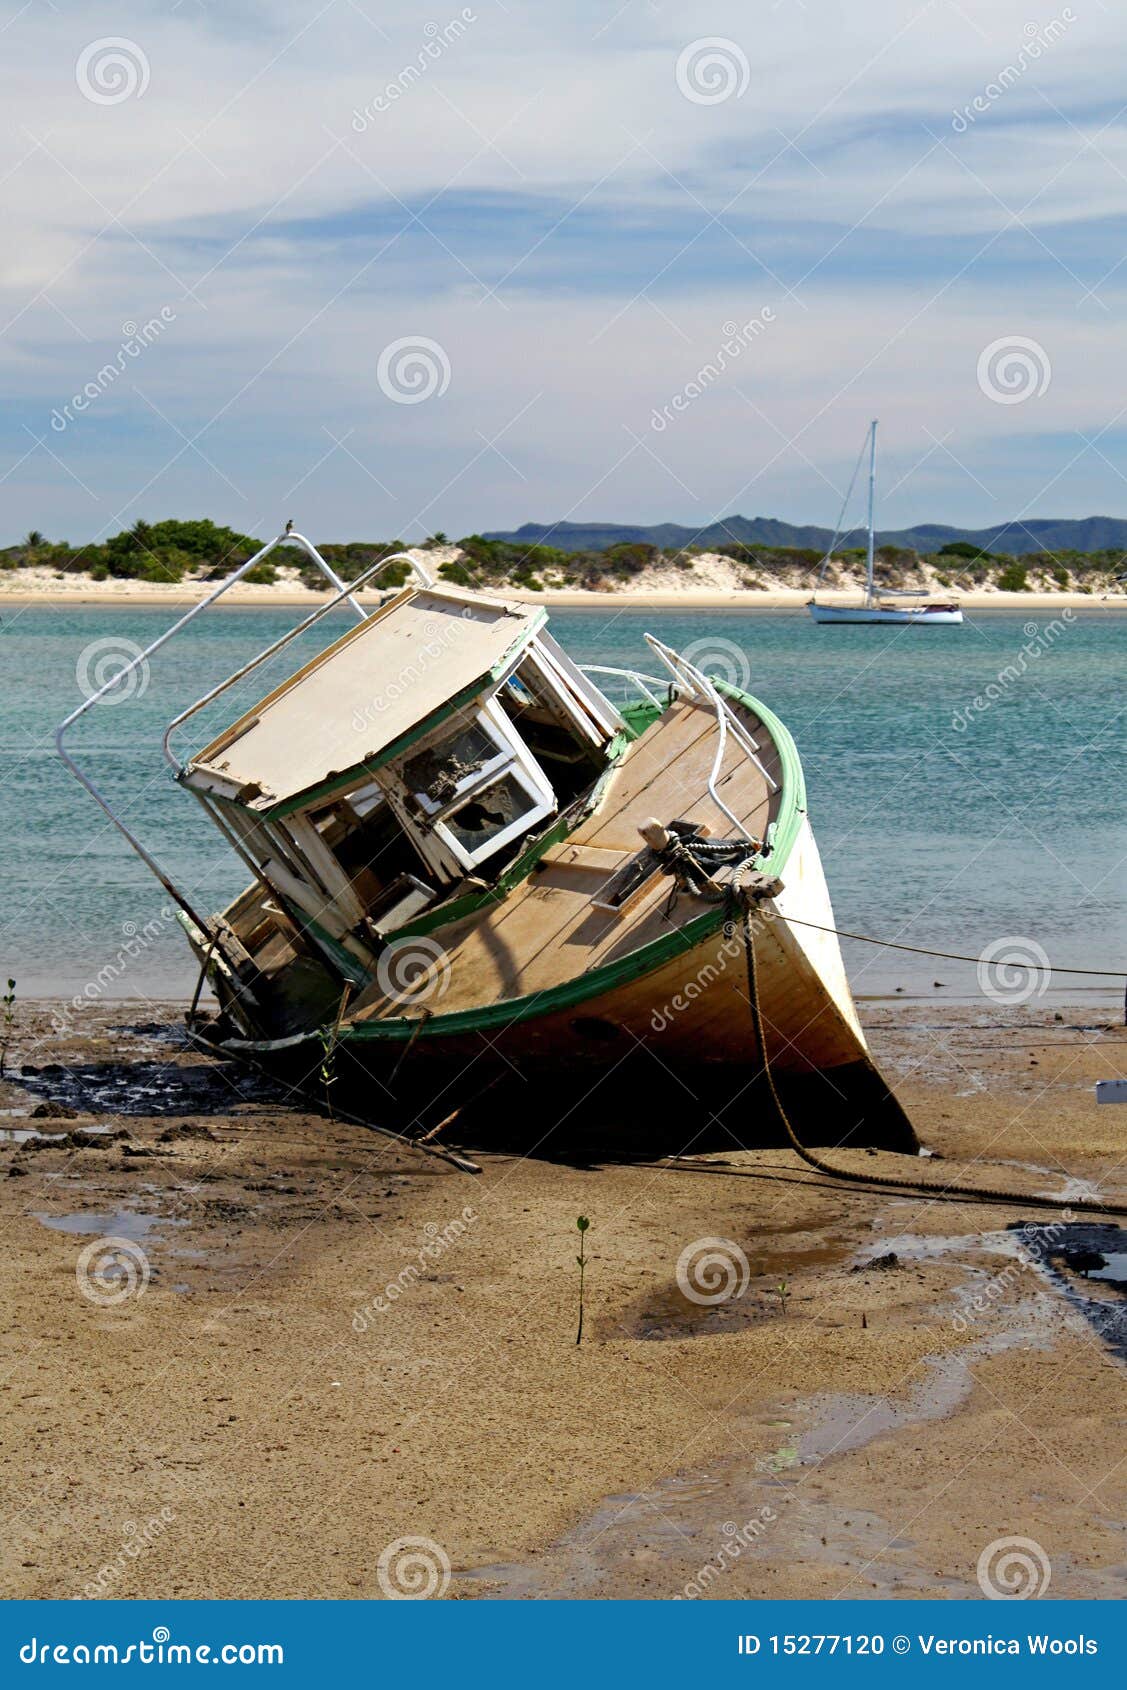 Old boat wrecked on the sand at Cooktown, Far North Queensland.